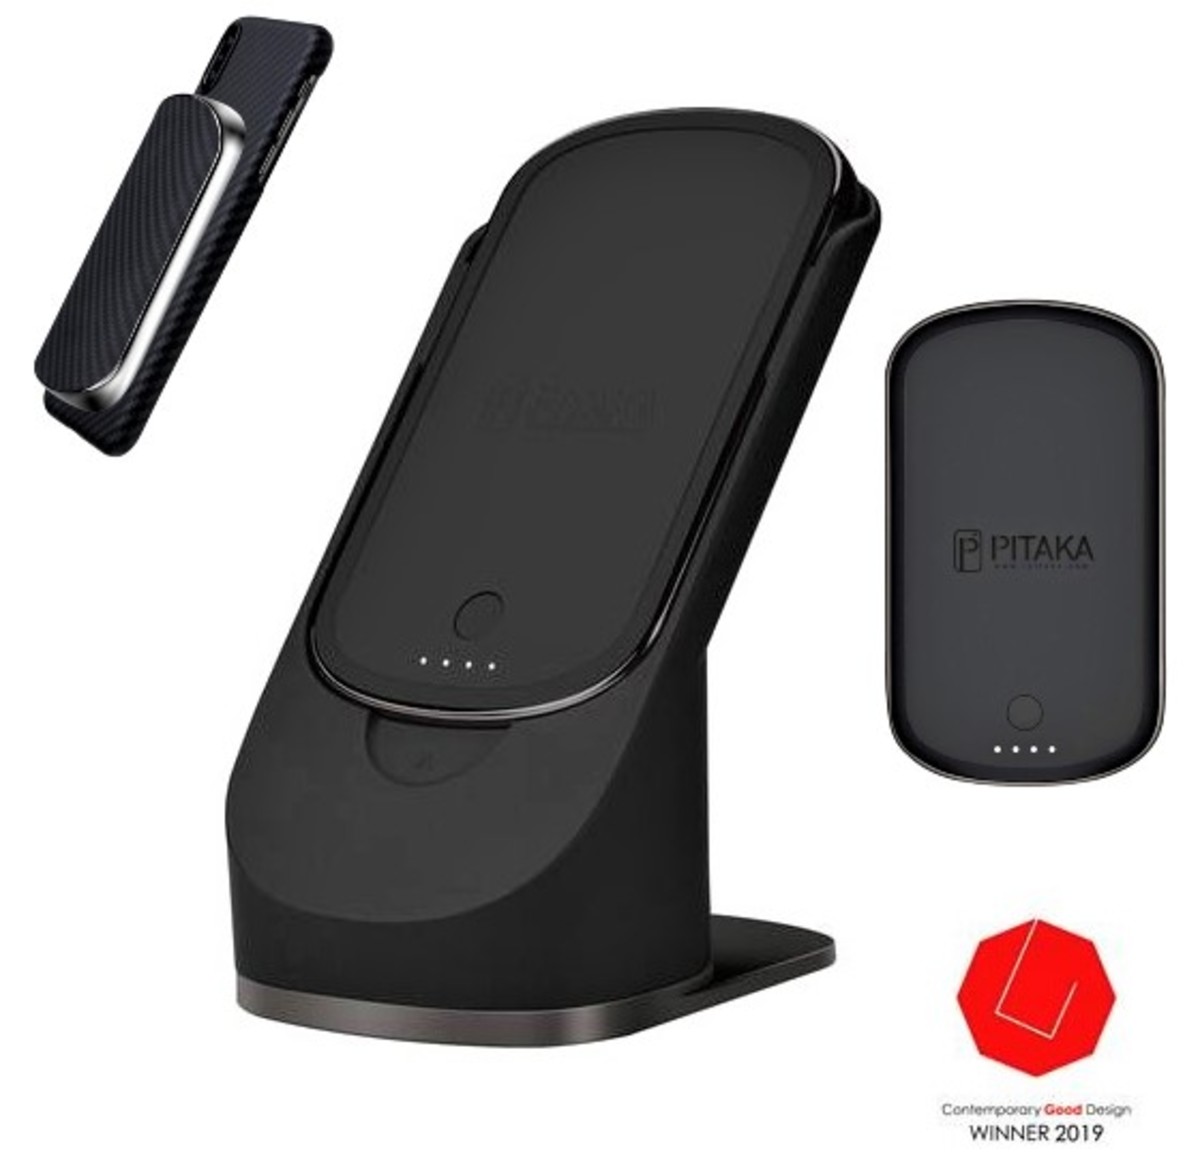 Pitaka MagEZ Juice Review: Most Innovative 2-in-1 Power Bank & Wireless Charging Stand